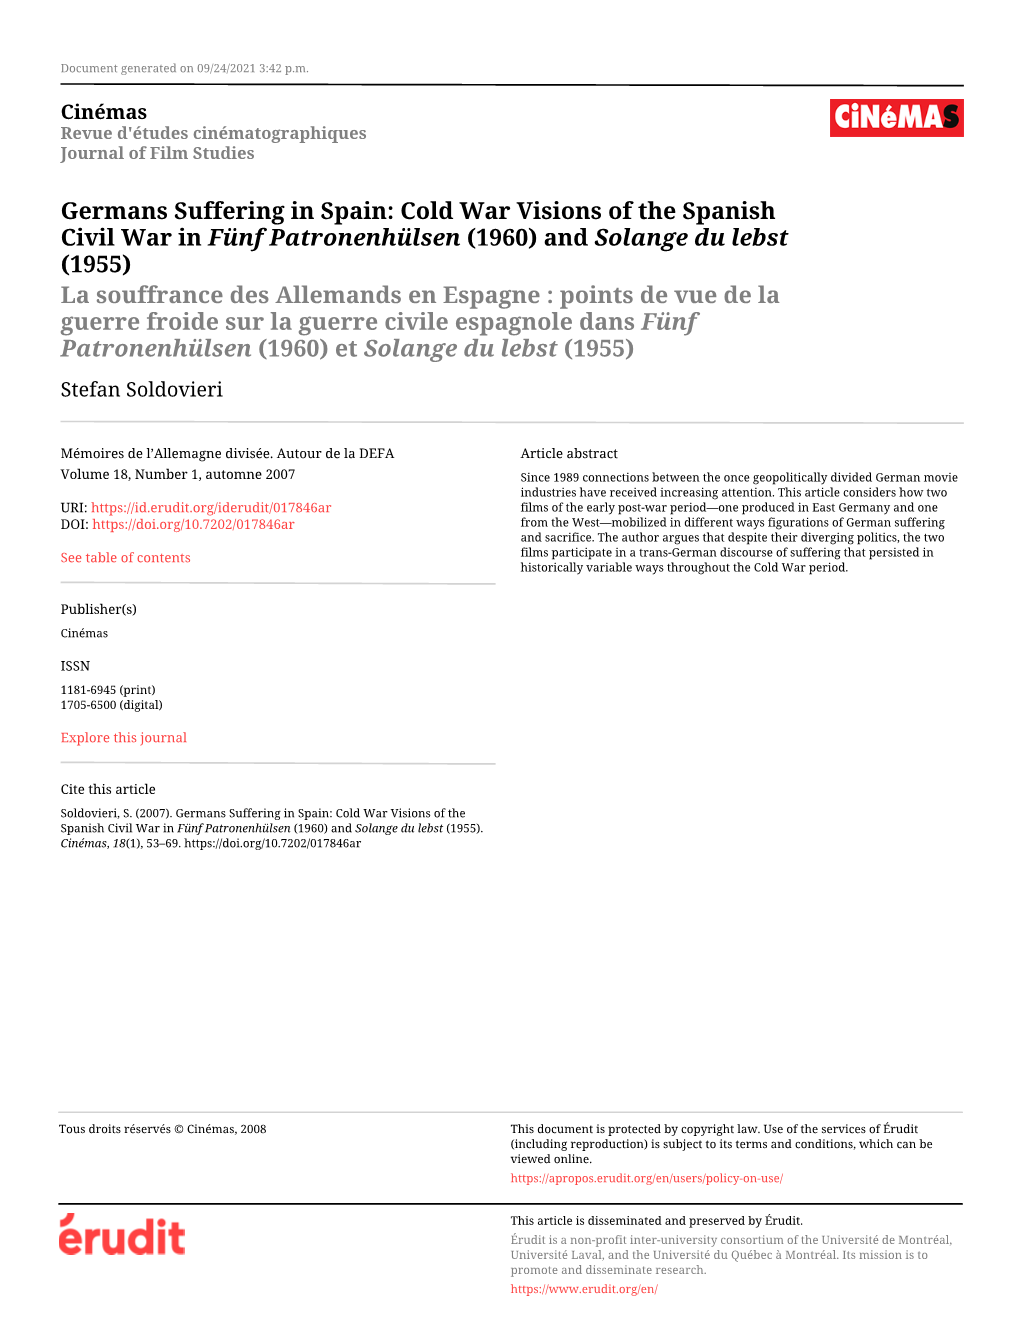 Germans Suffering in Spain: Cold War Visions of the Spanish Civil War In